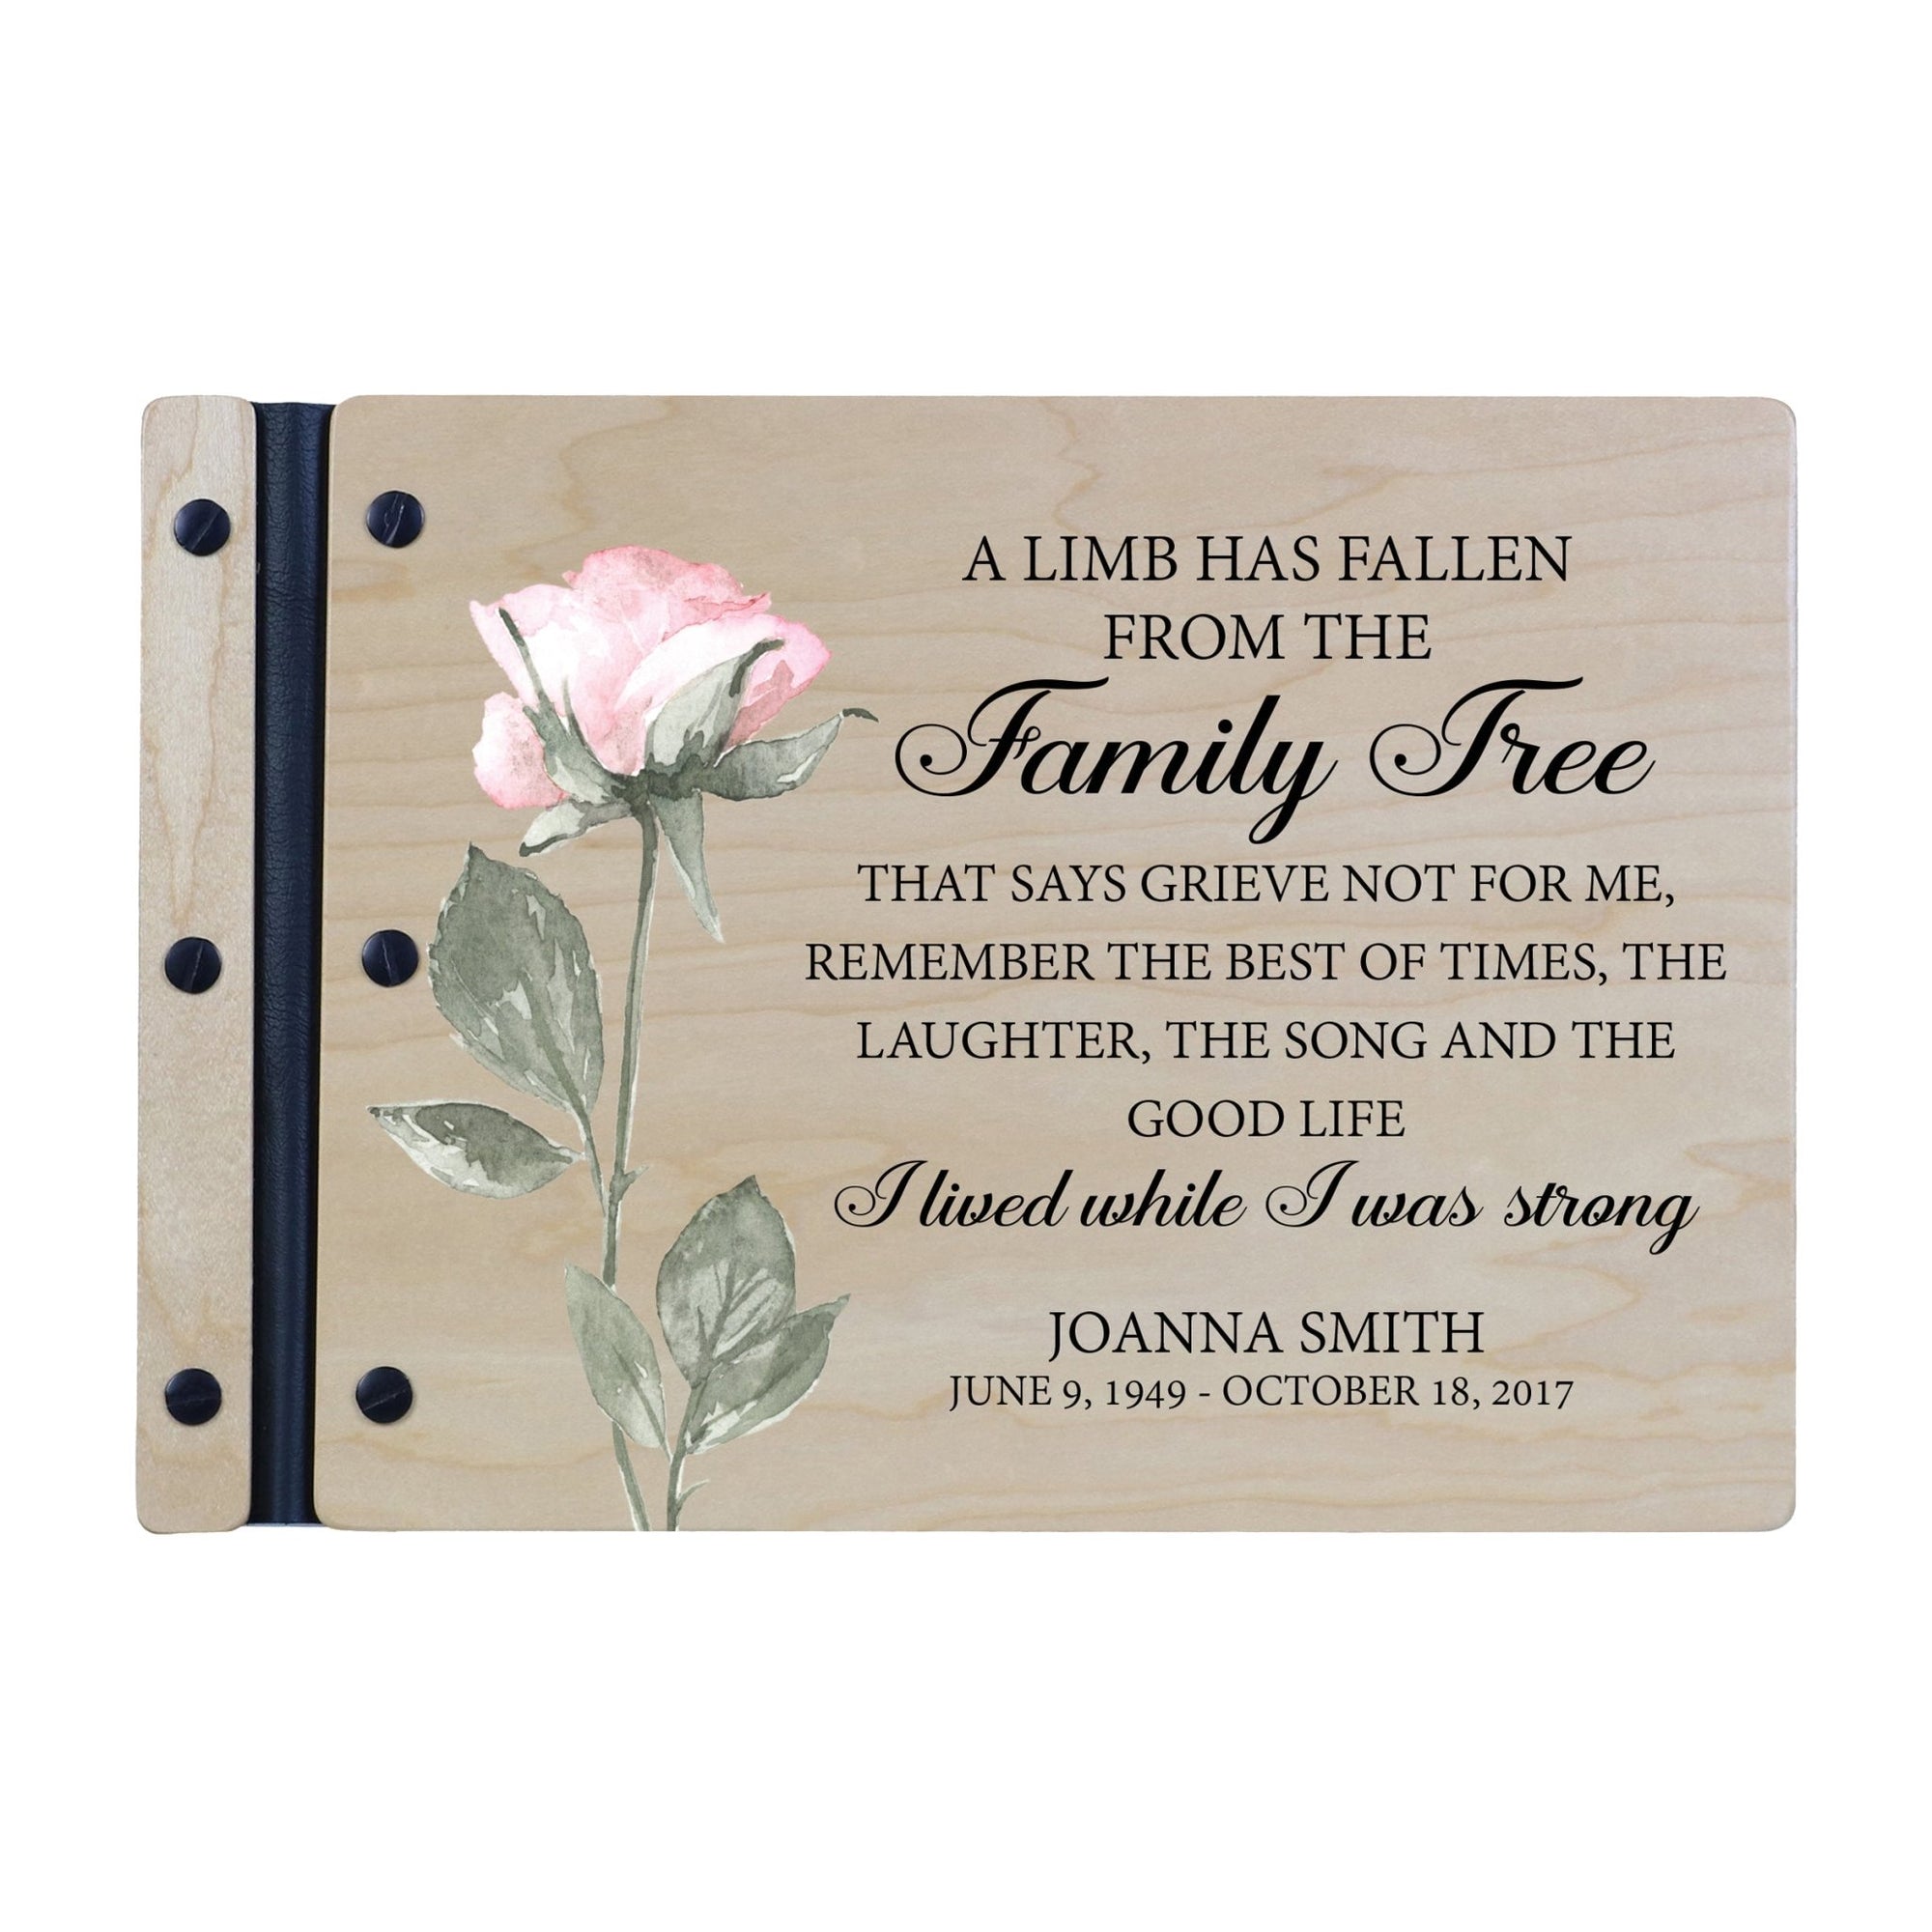 Personalized Medium Wooden Memorial Guestbook 12.375x8.5 - A Limb Has Fallen (Laughter) - LifeSong Milestones